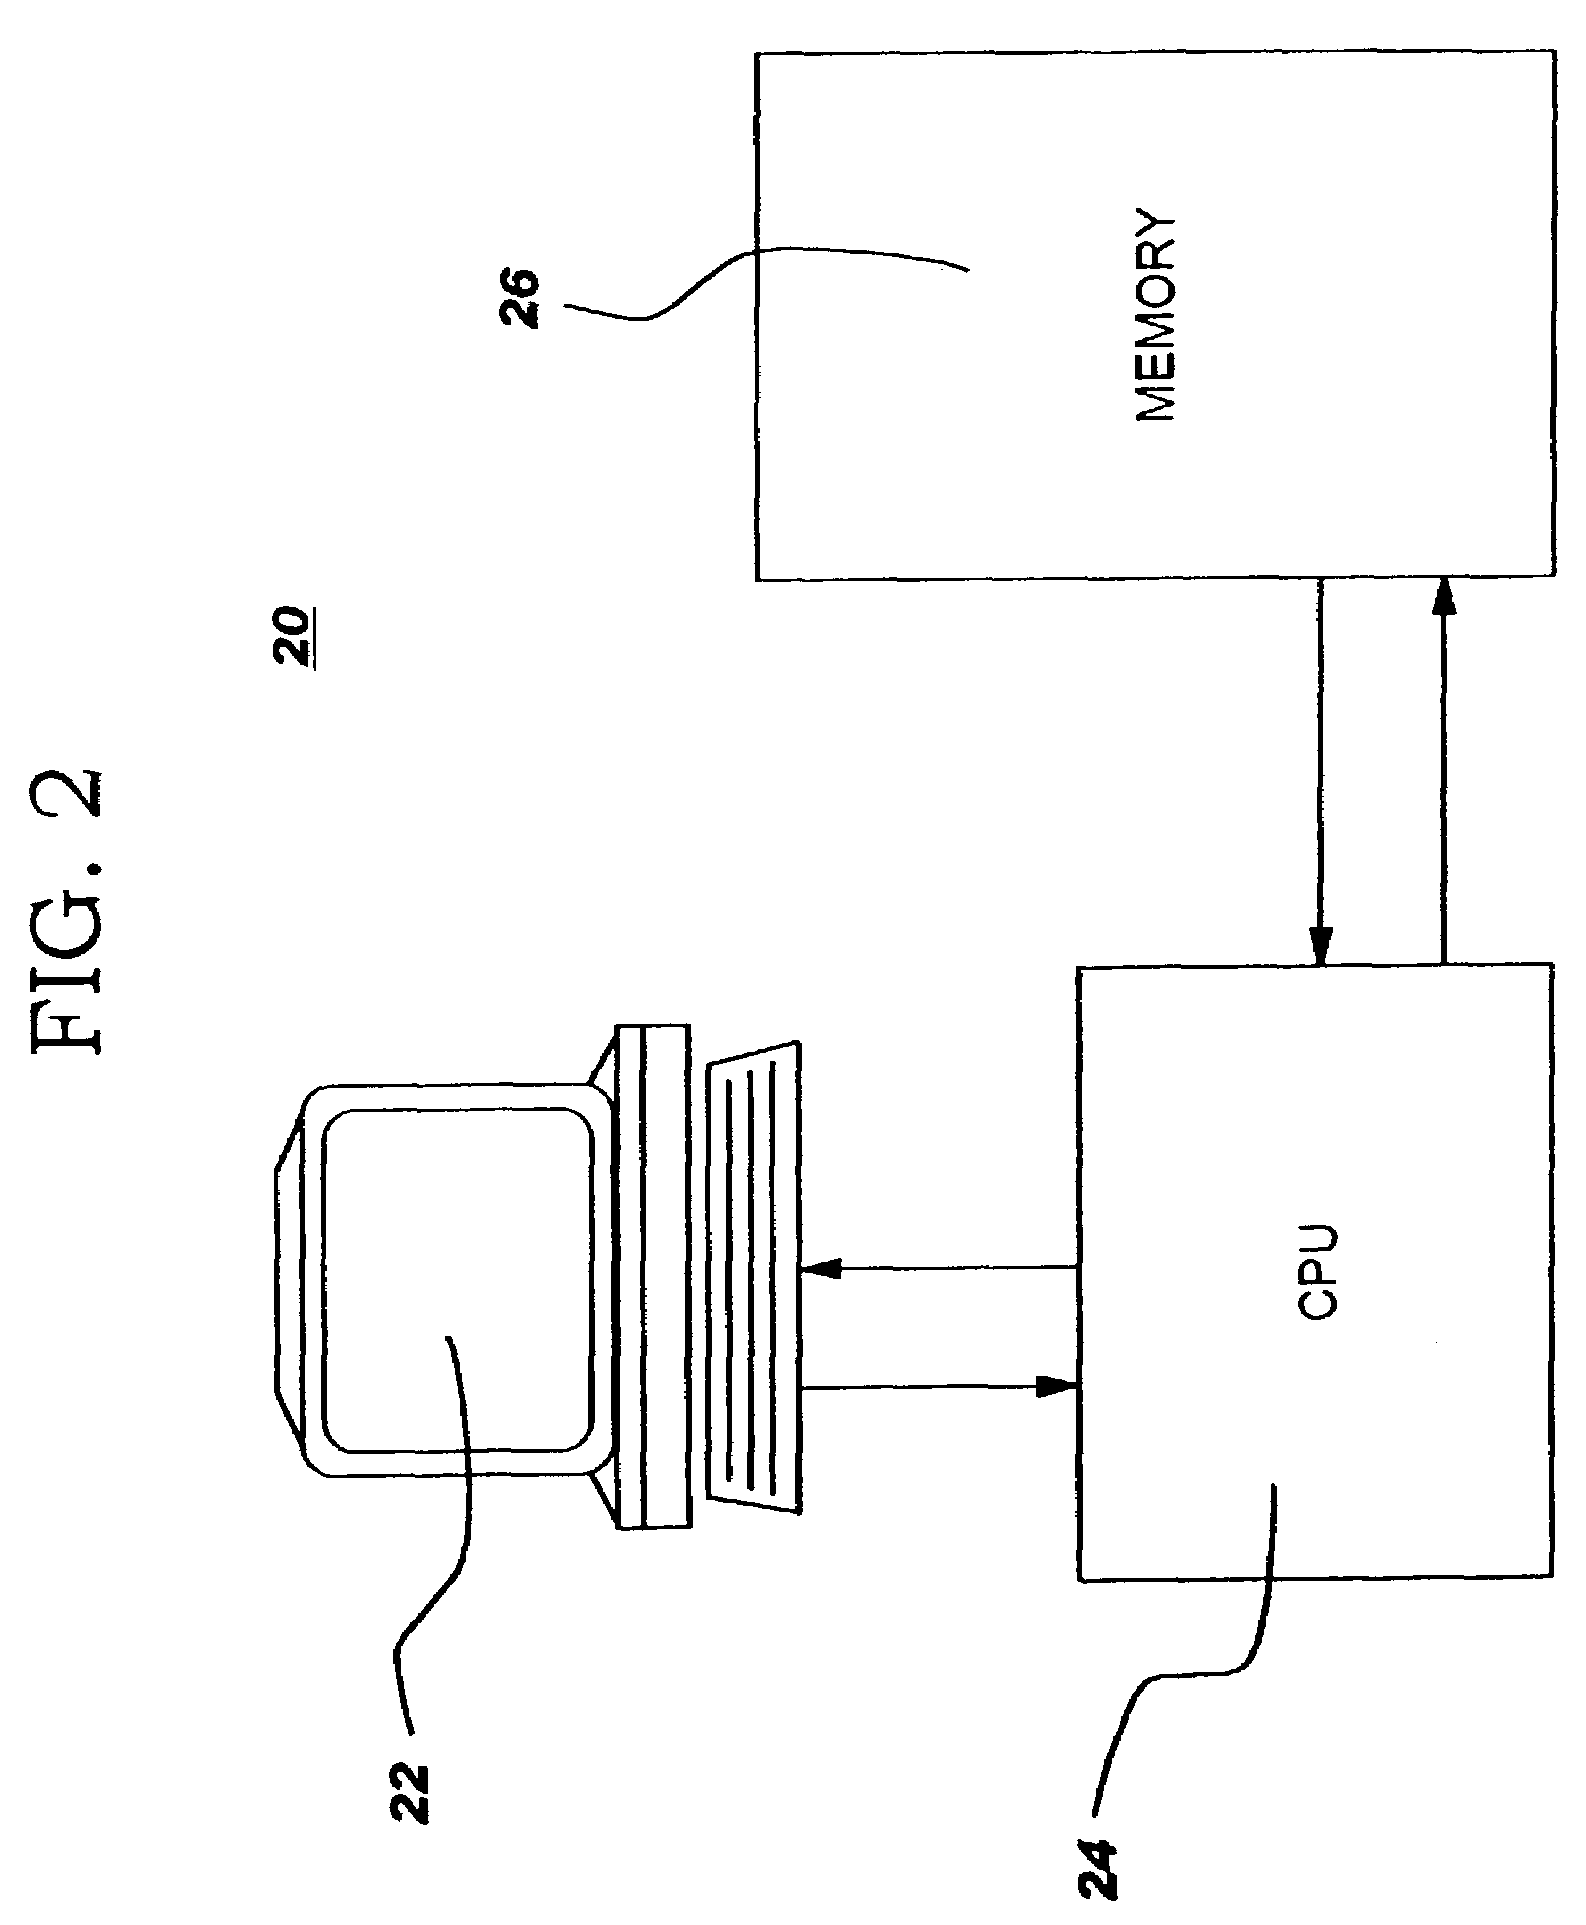 System and method for targeted marketing of goods and/or services to specific customers